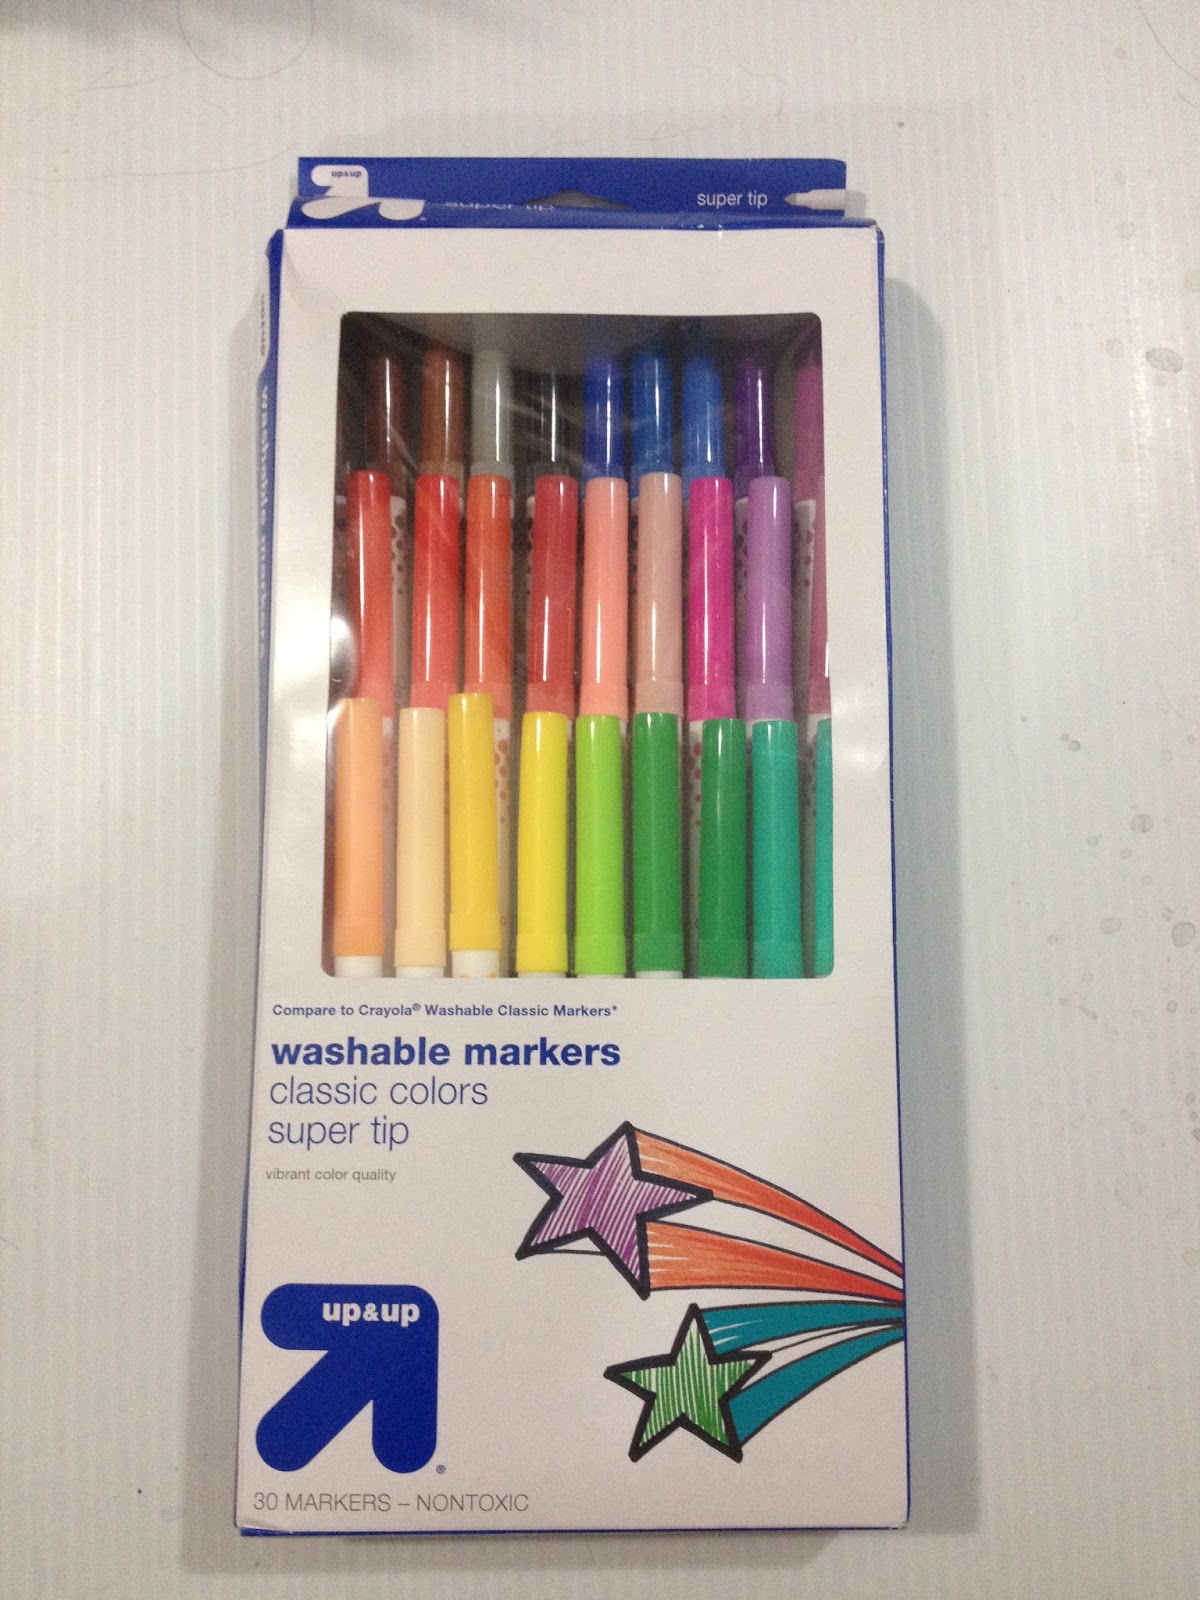 Crayola 8 Count Gel FX Washable Markers, Colouring Pens & Markers